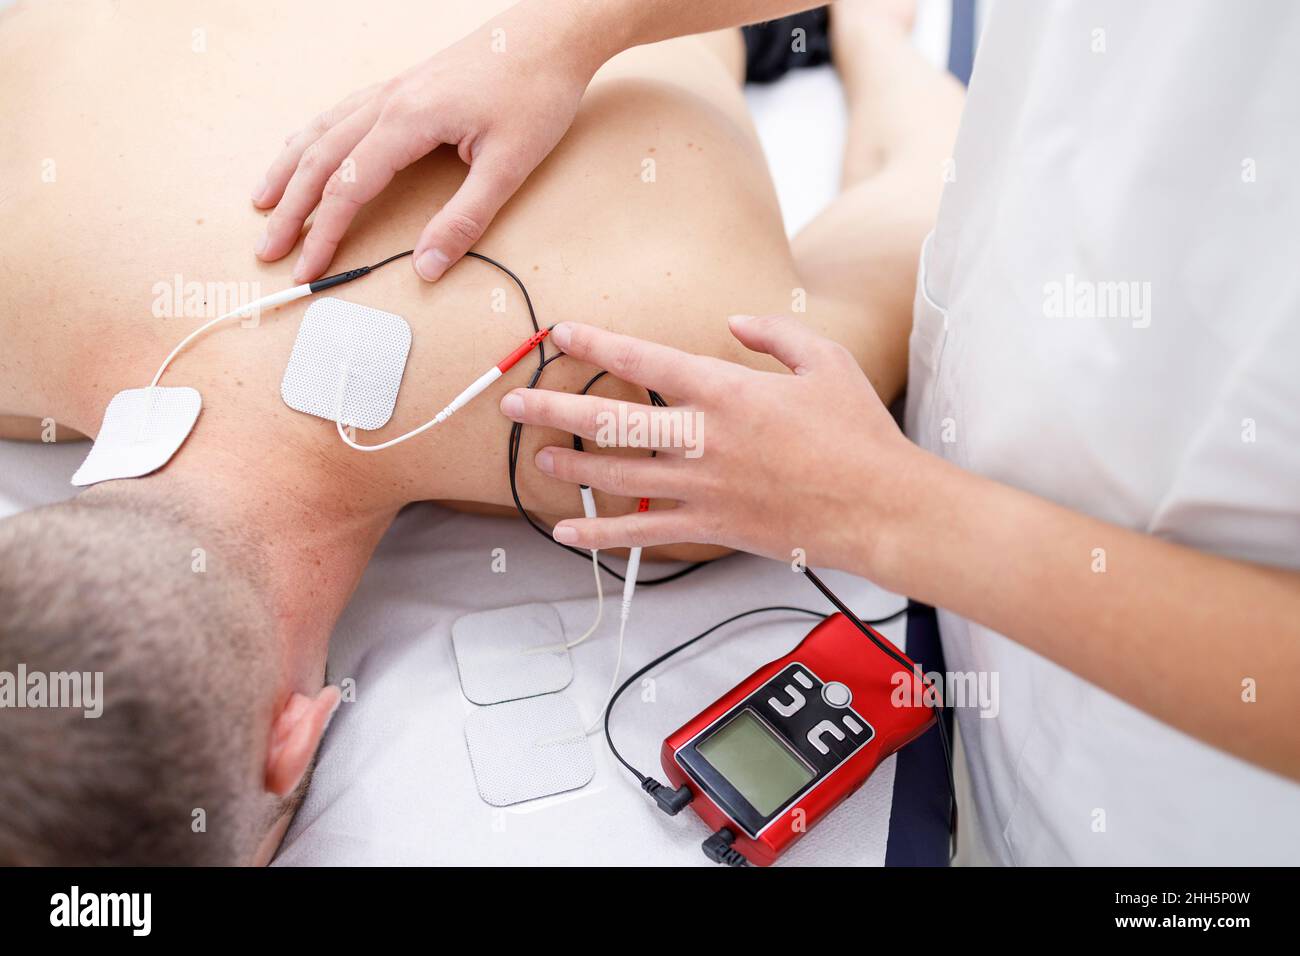 Physical therapist applying electrodes on athlete's neck Stock Photo